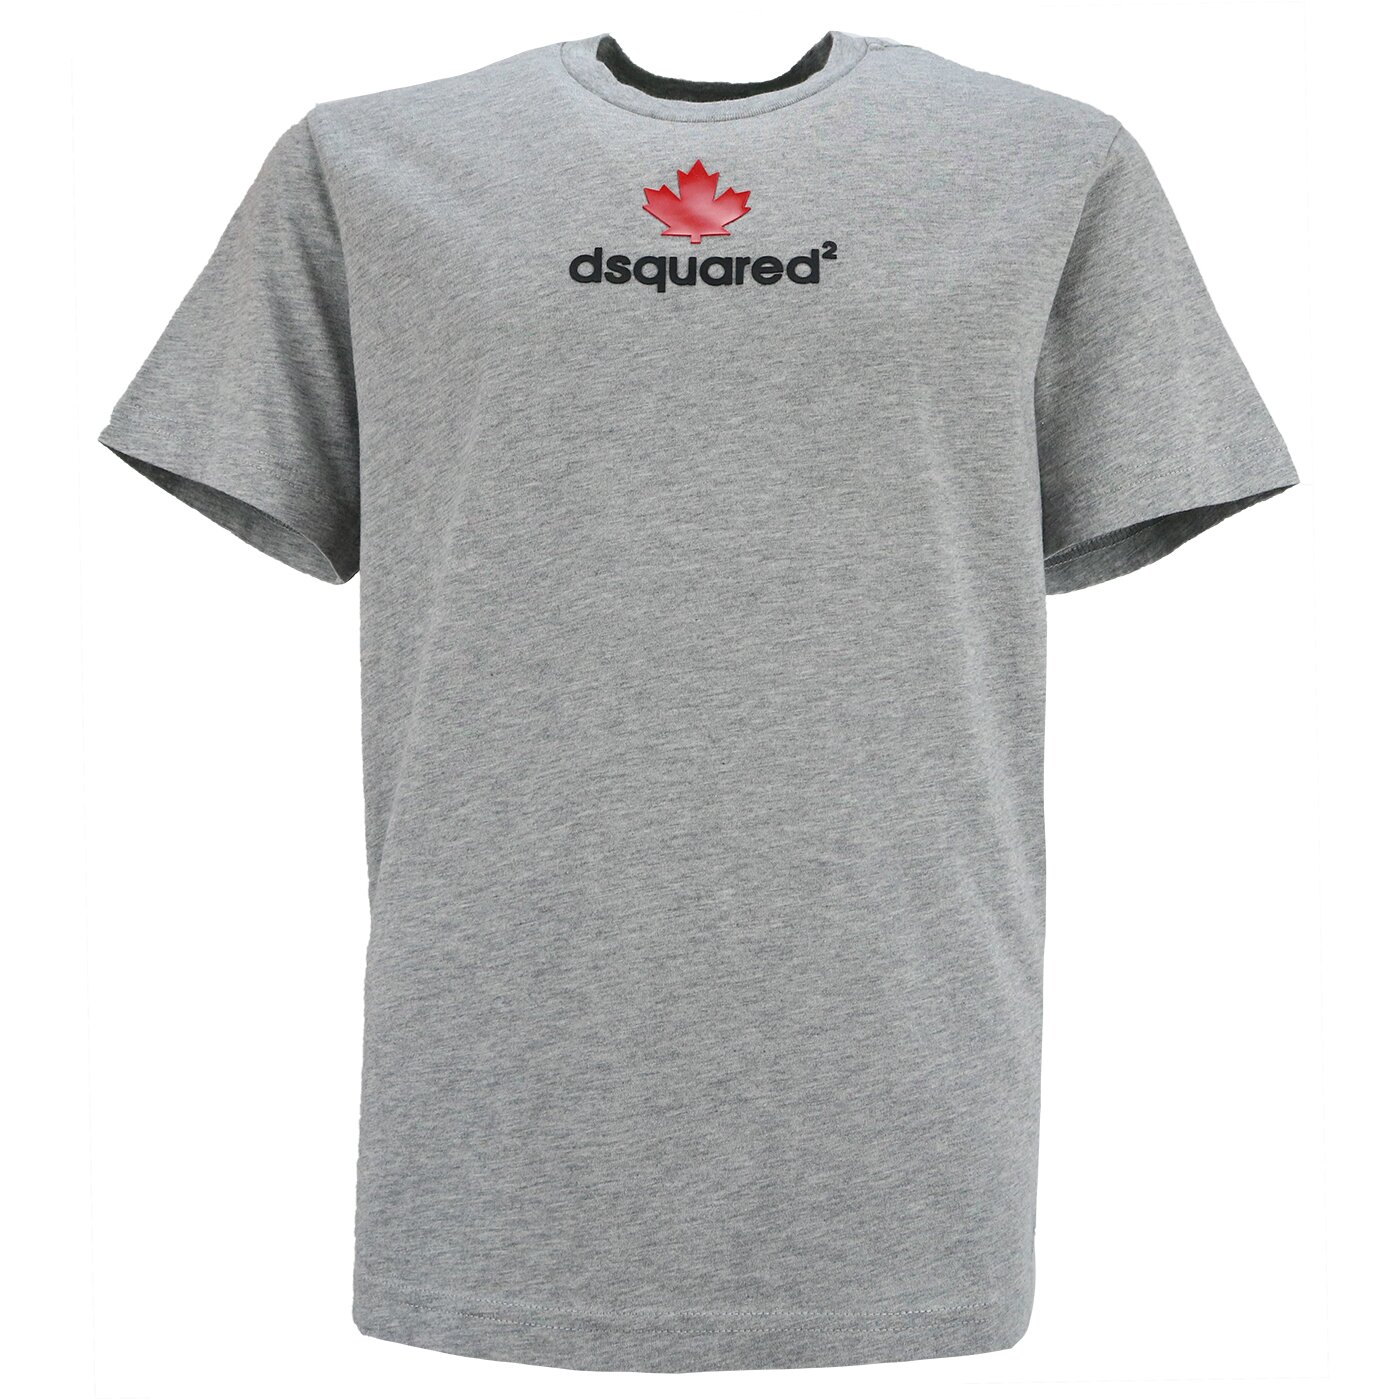 Dsquared2 shirt Grijs DQ0515 Relax Fit